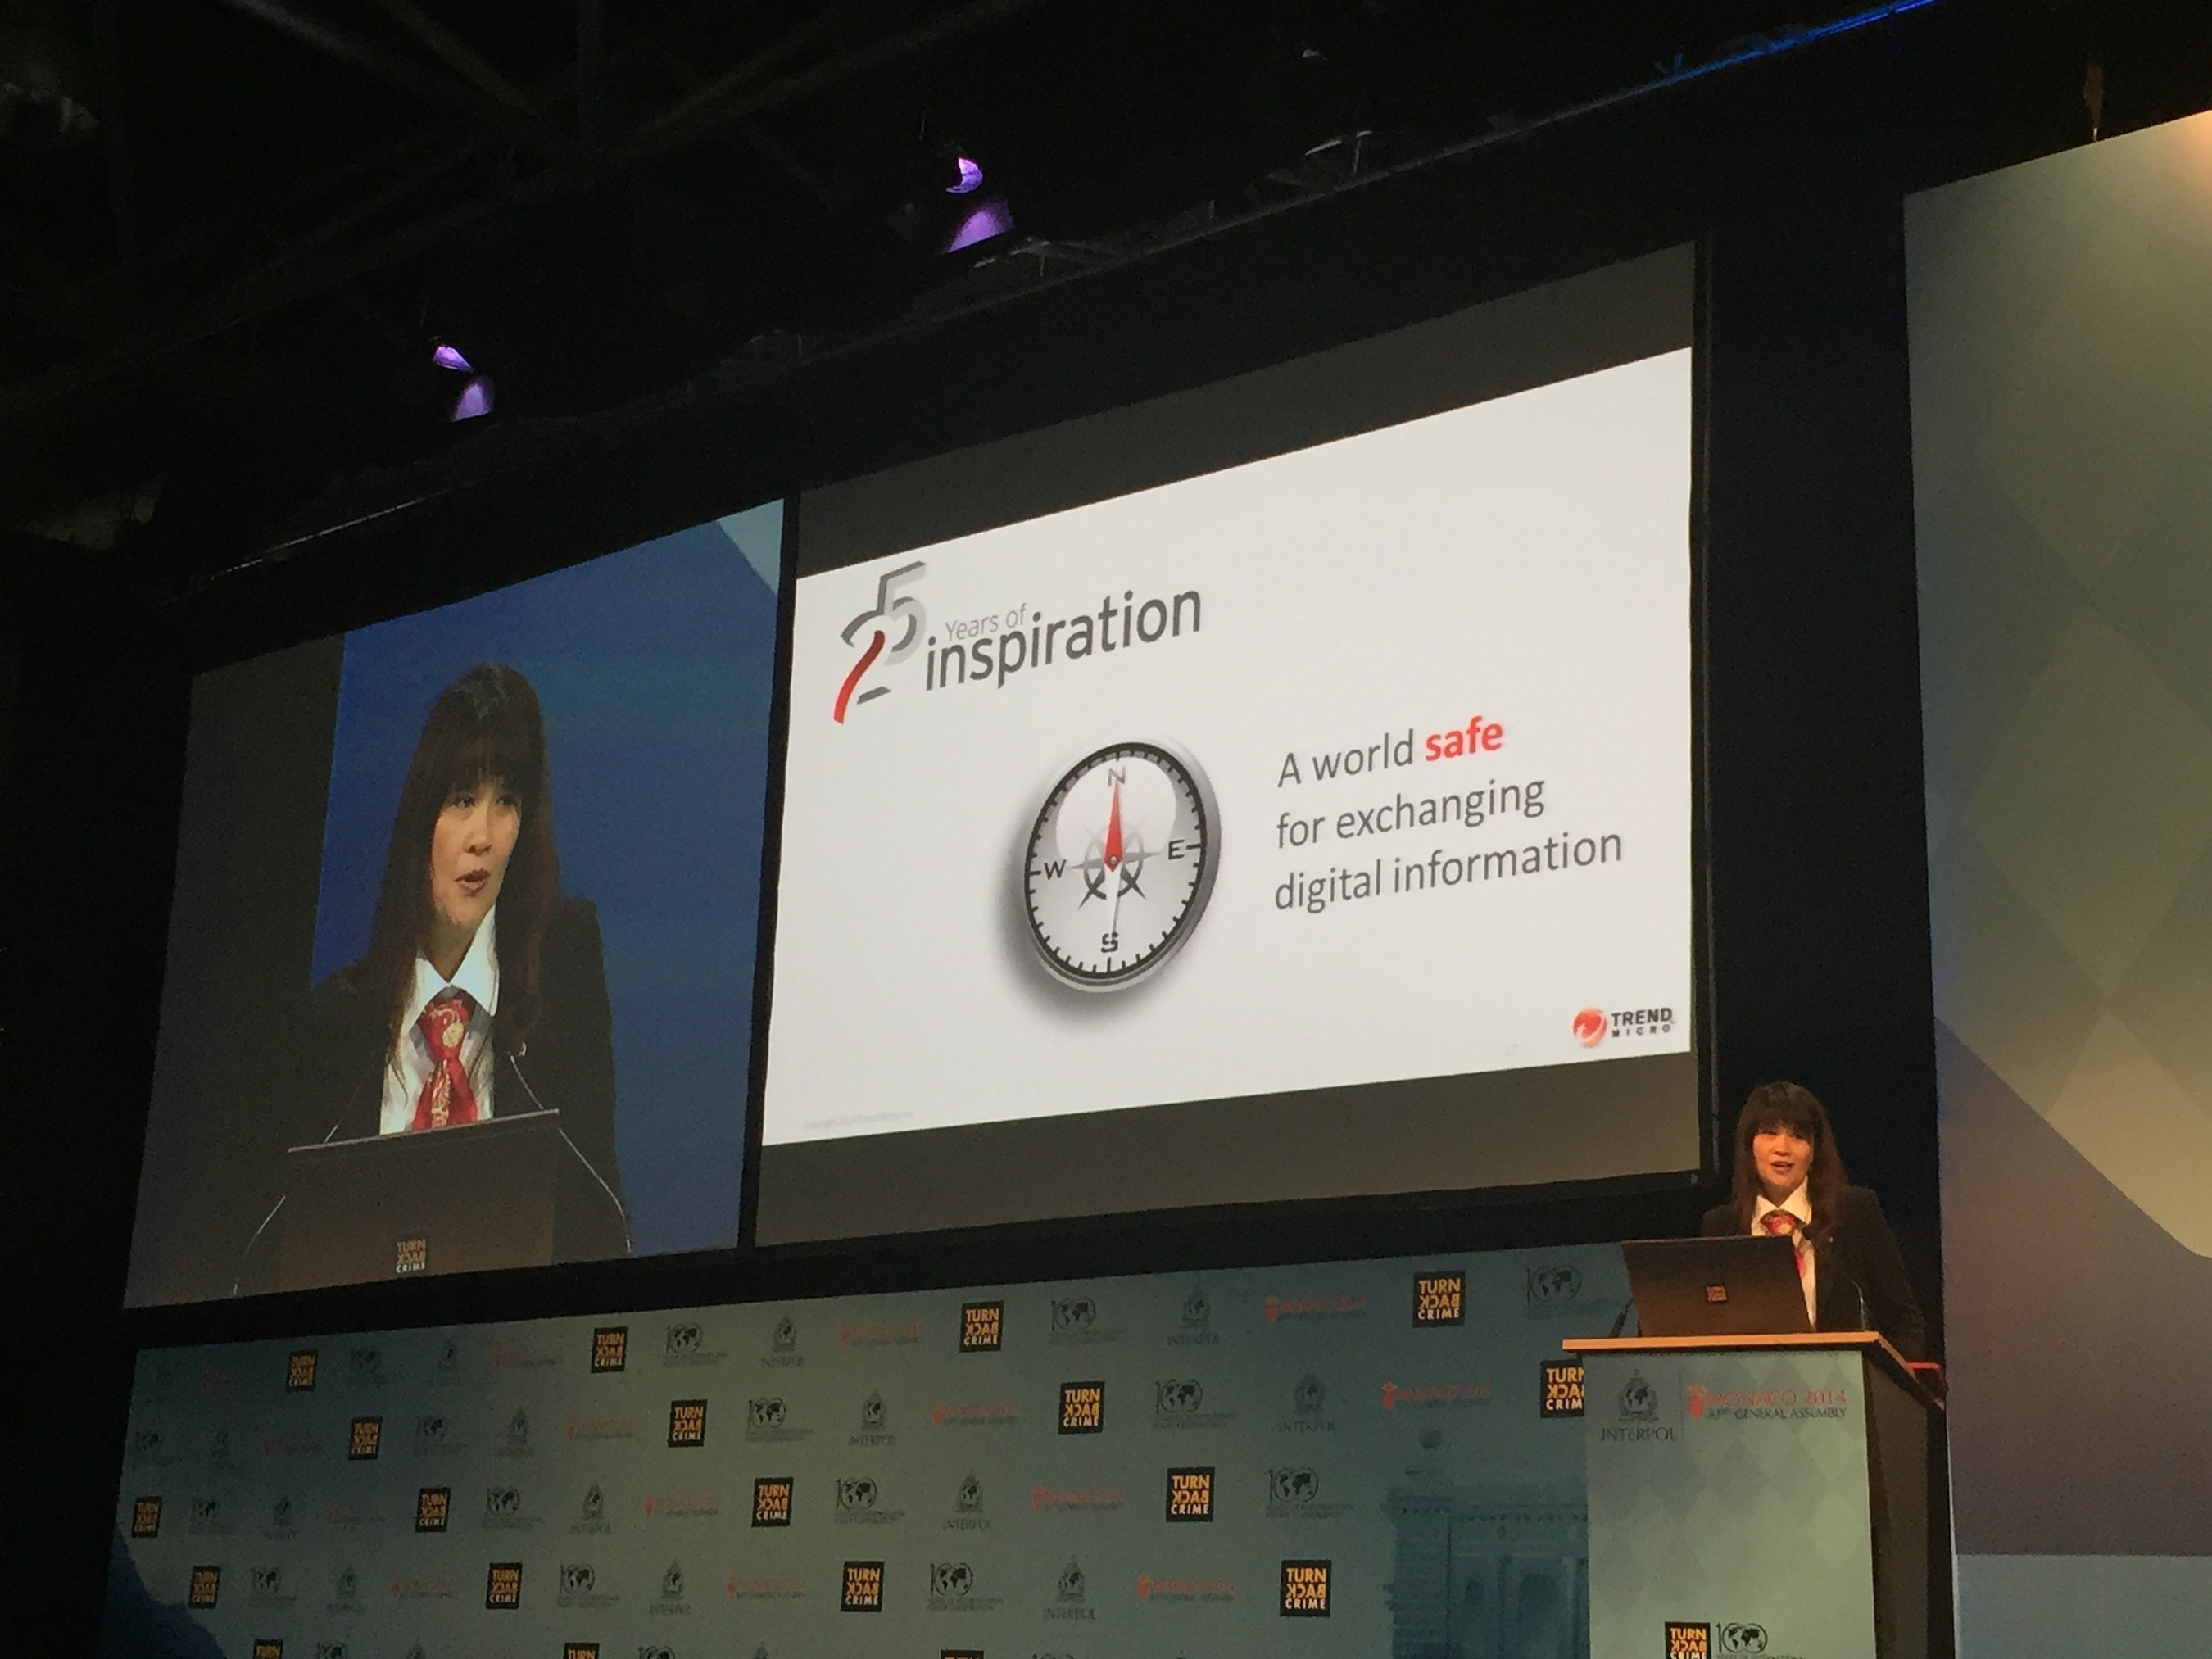 Trend Micro CEO Eva Chen delivers keynote address at 83rd Annual INTERPOL General Assembly